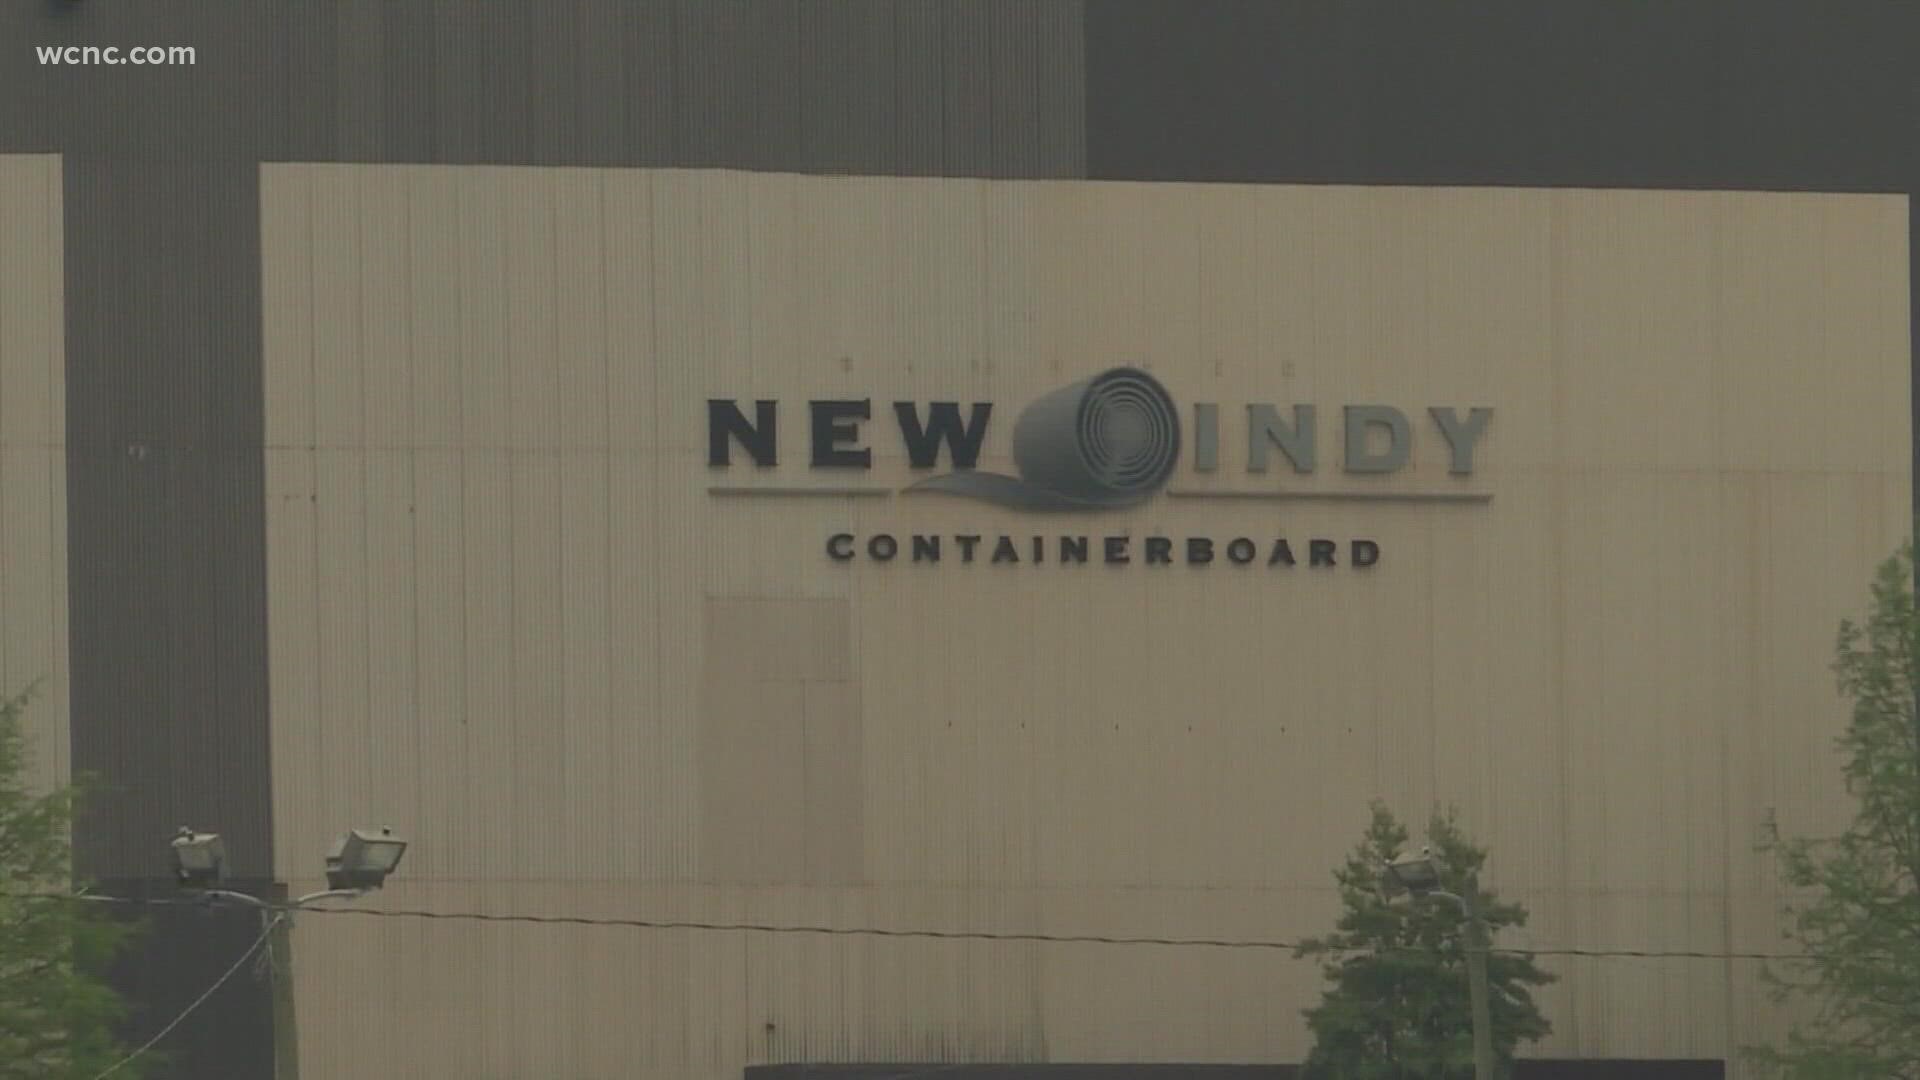 WCNC Charlotte's Brandon Goldner was given a guided tour of the New-Indy Containerboard facility in Catawba, SC Friday.